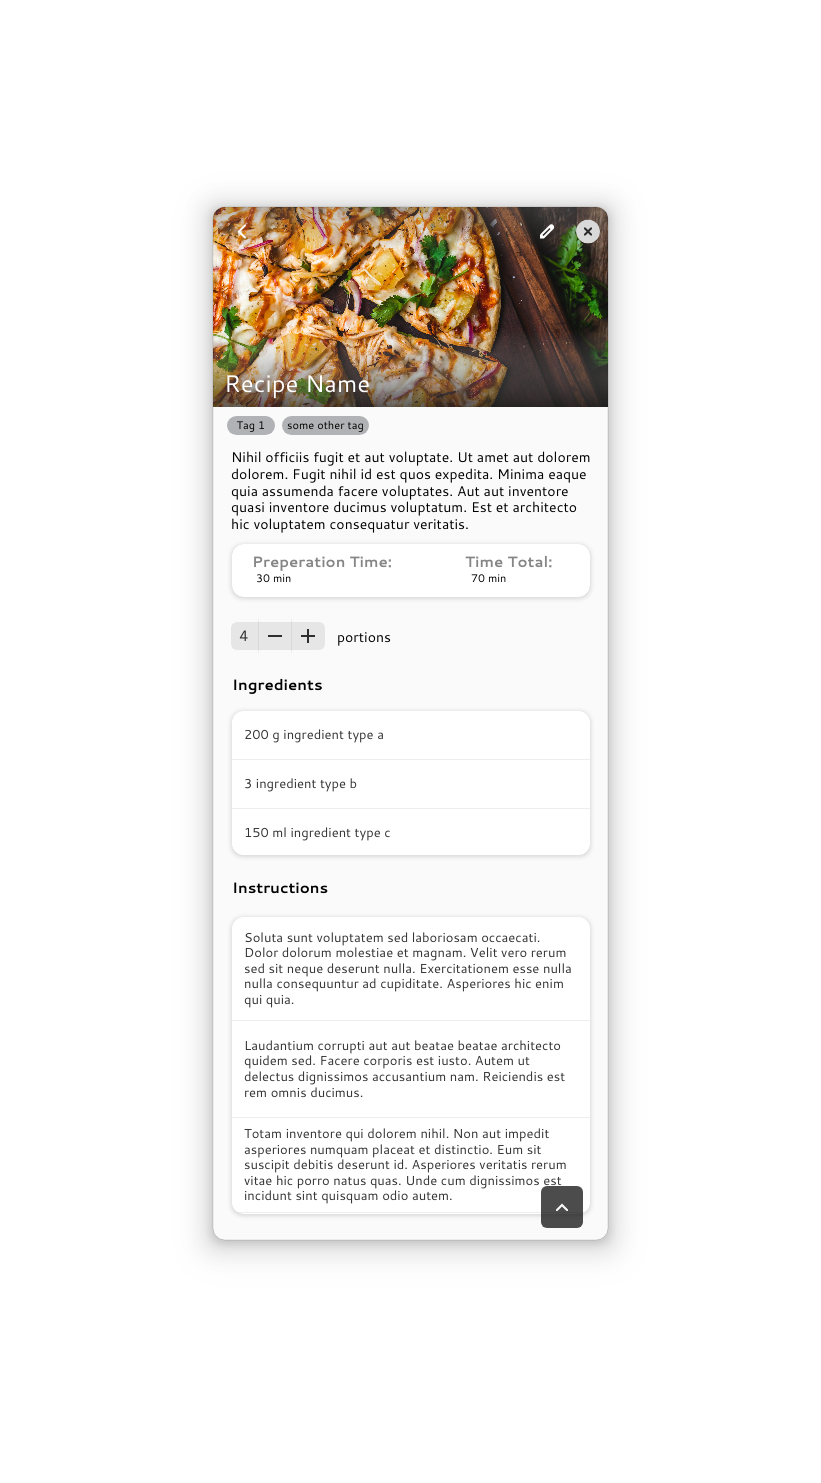 An image of a gtk app in a mobile style form factor (portrait orientation) but it is too long to show content, that would normally require scrolling. The ingreients and instructions for preparing a meal are given.